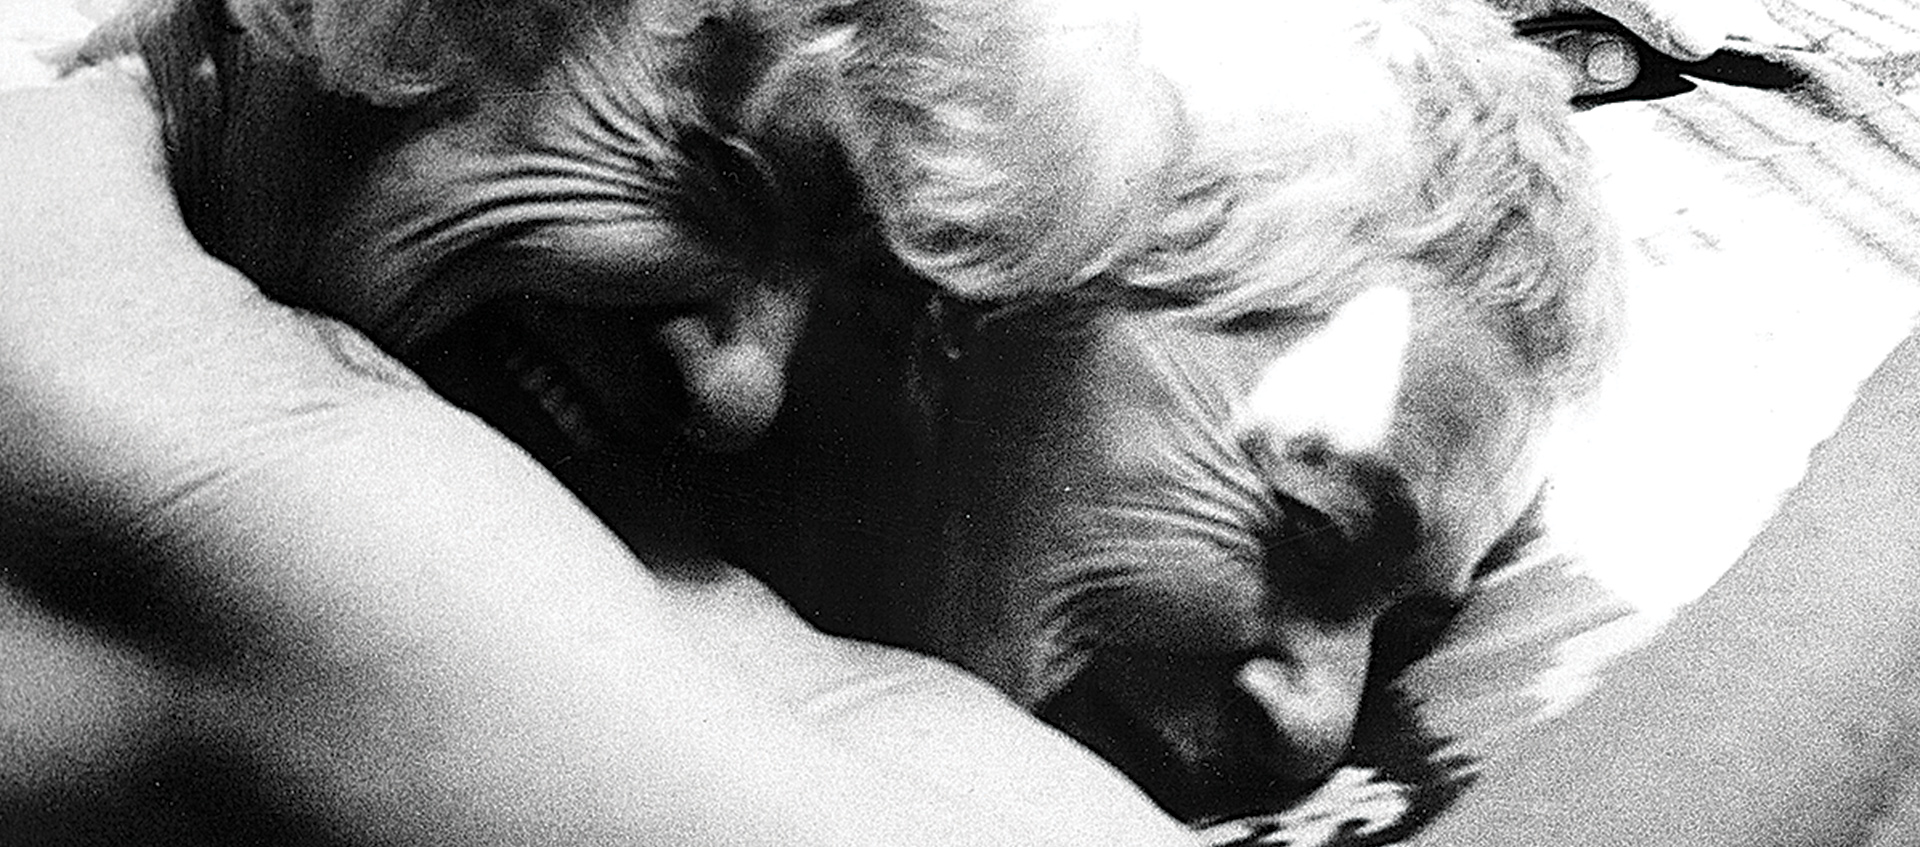 Still from the film Nitrate Kisses by Barbara Hammer